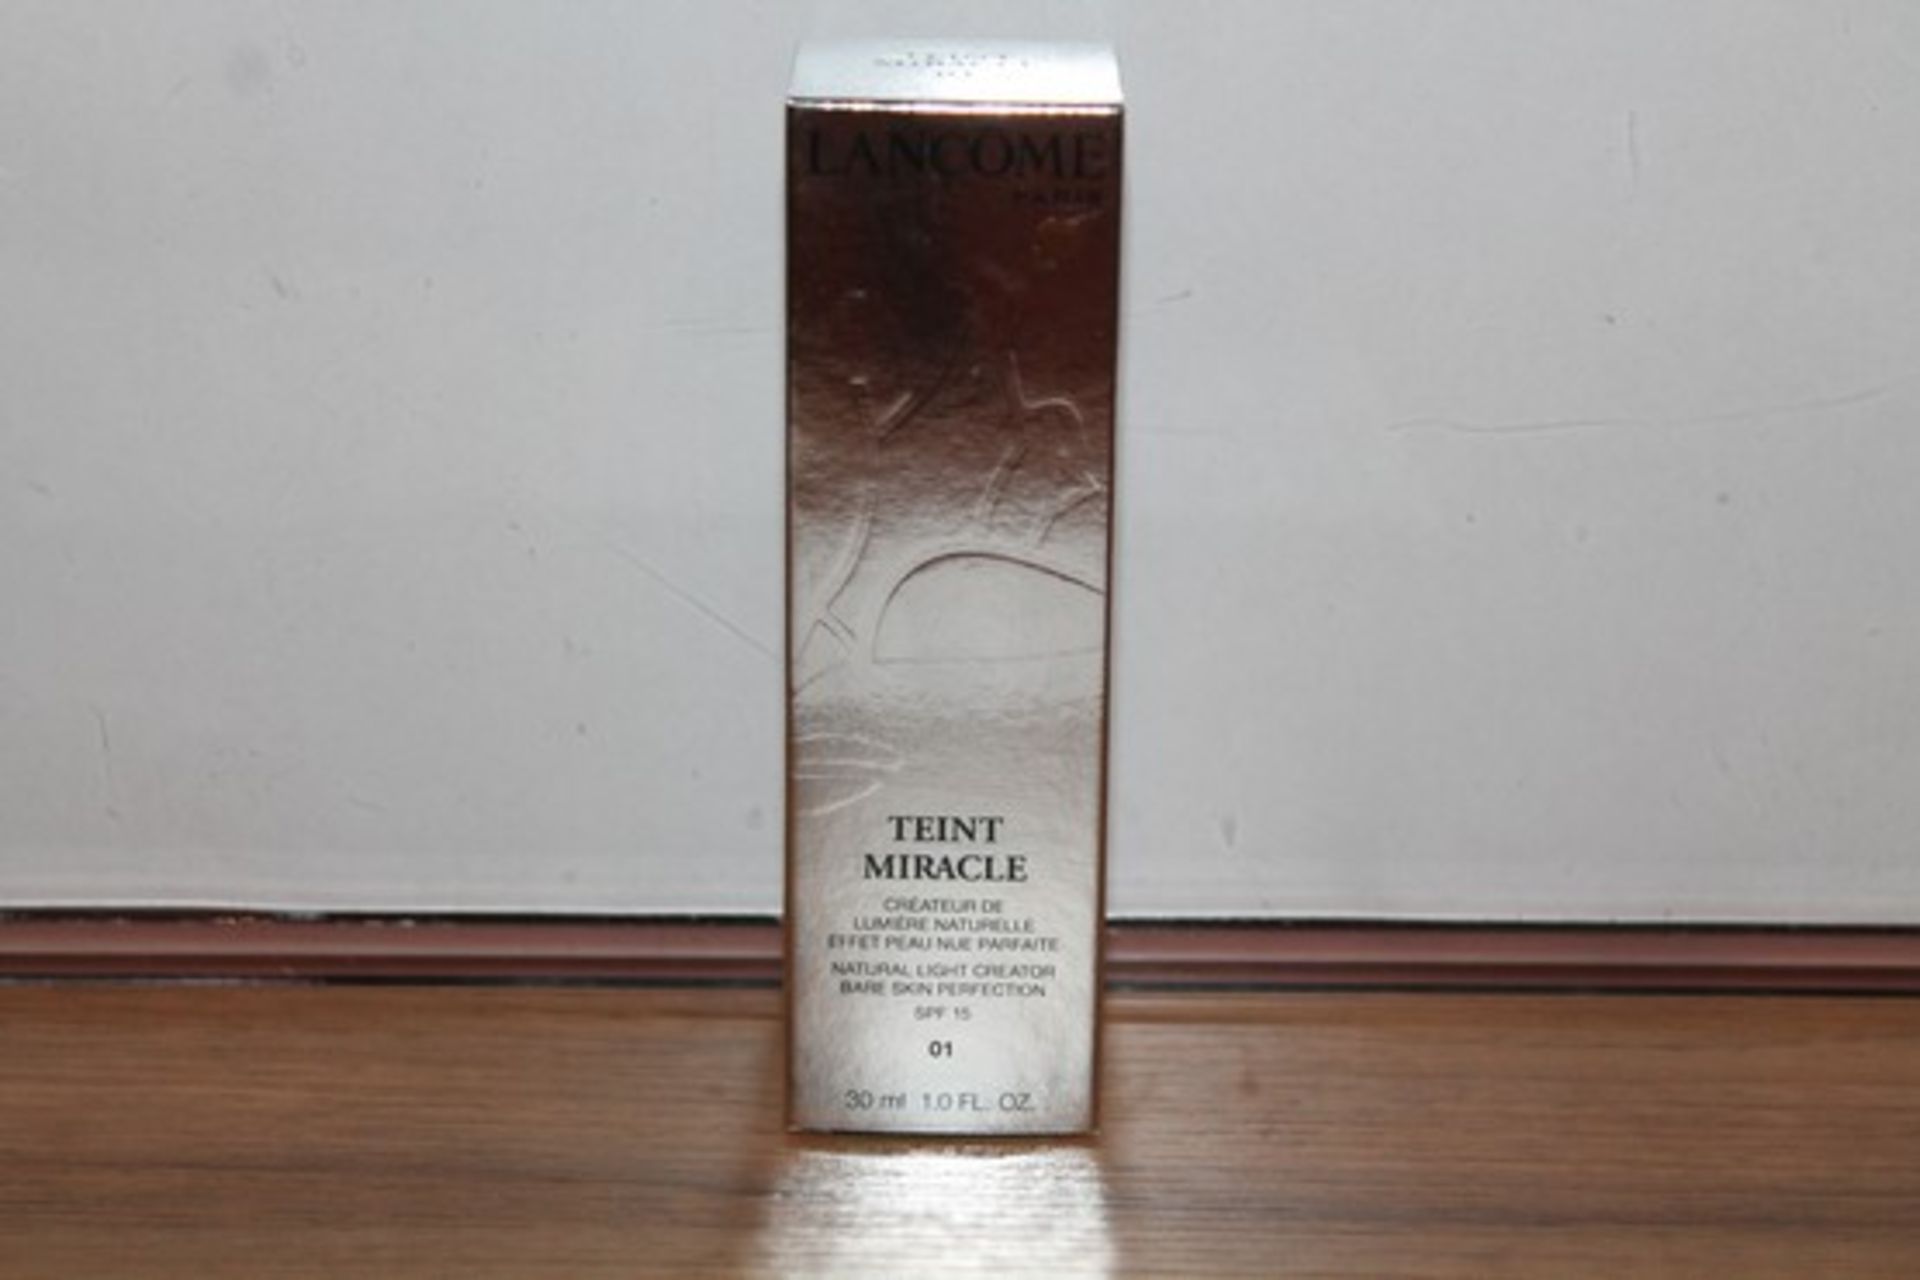 BOXED BRAND NEW FACTORY SEALED LANCOME PARIS TEINT BARE MIRACLE, BARE SKIN PROTECTION, SPF 15 007,